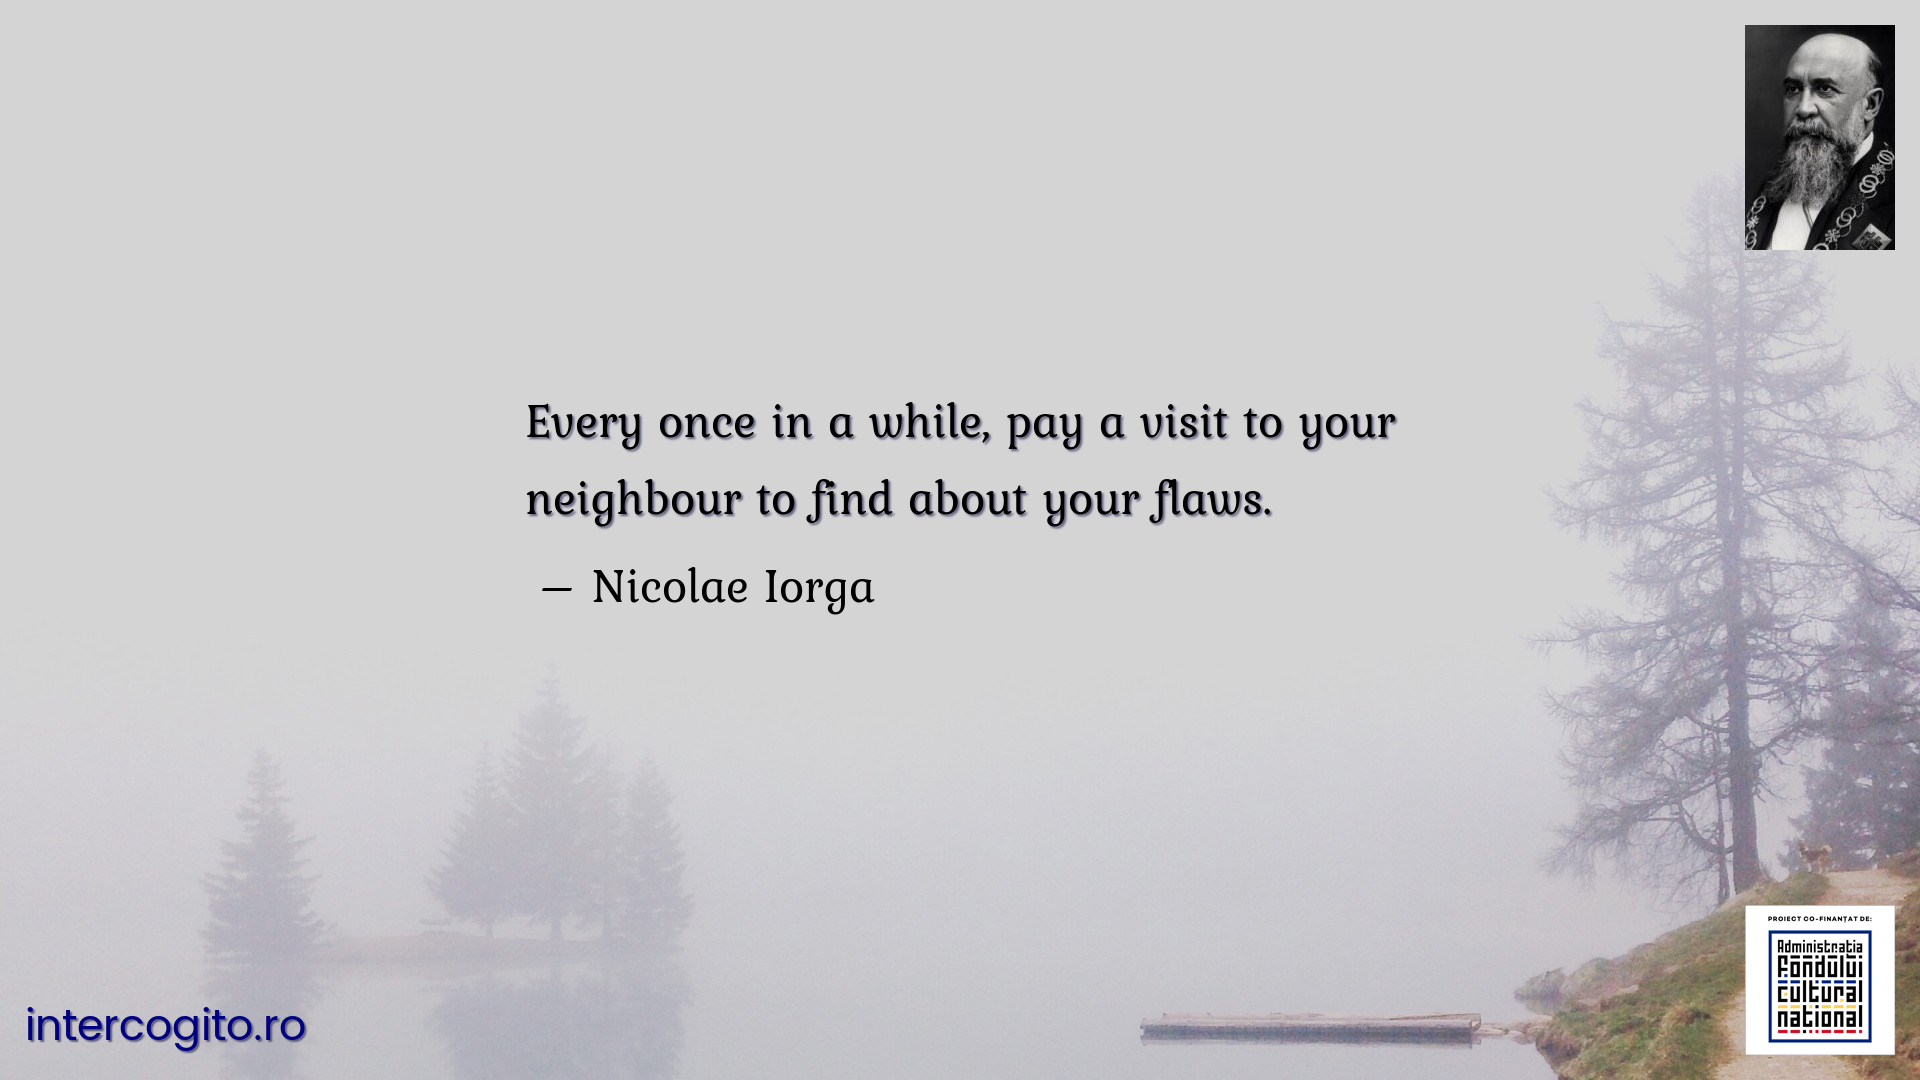 Every once in a while, pay a visit to your neighbour to find about your flaws.